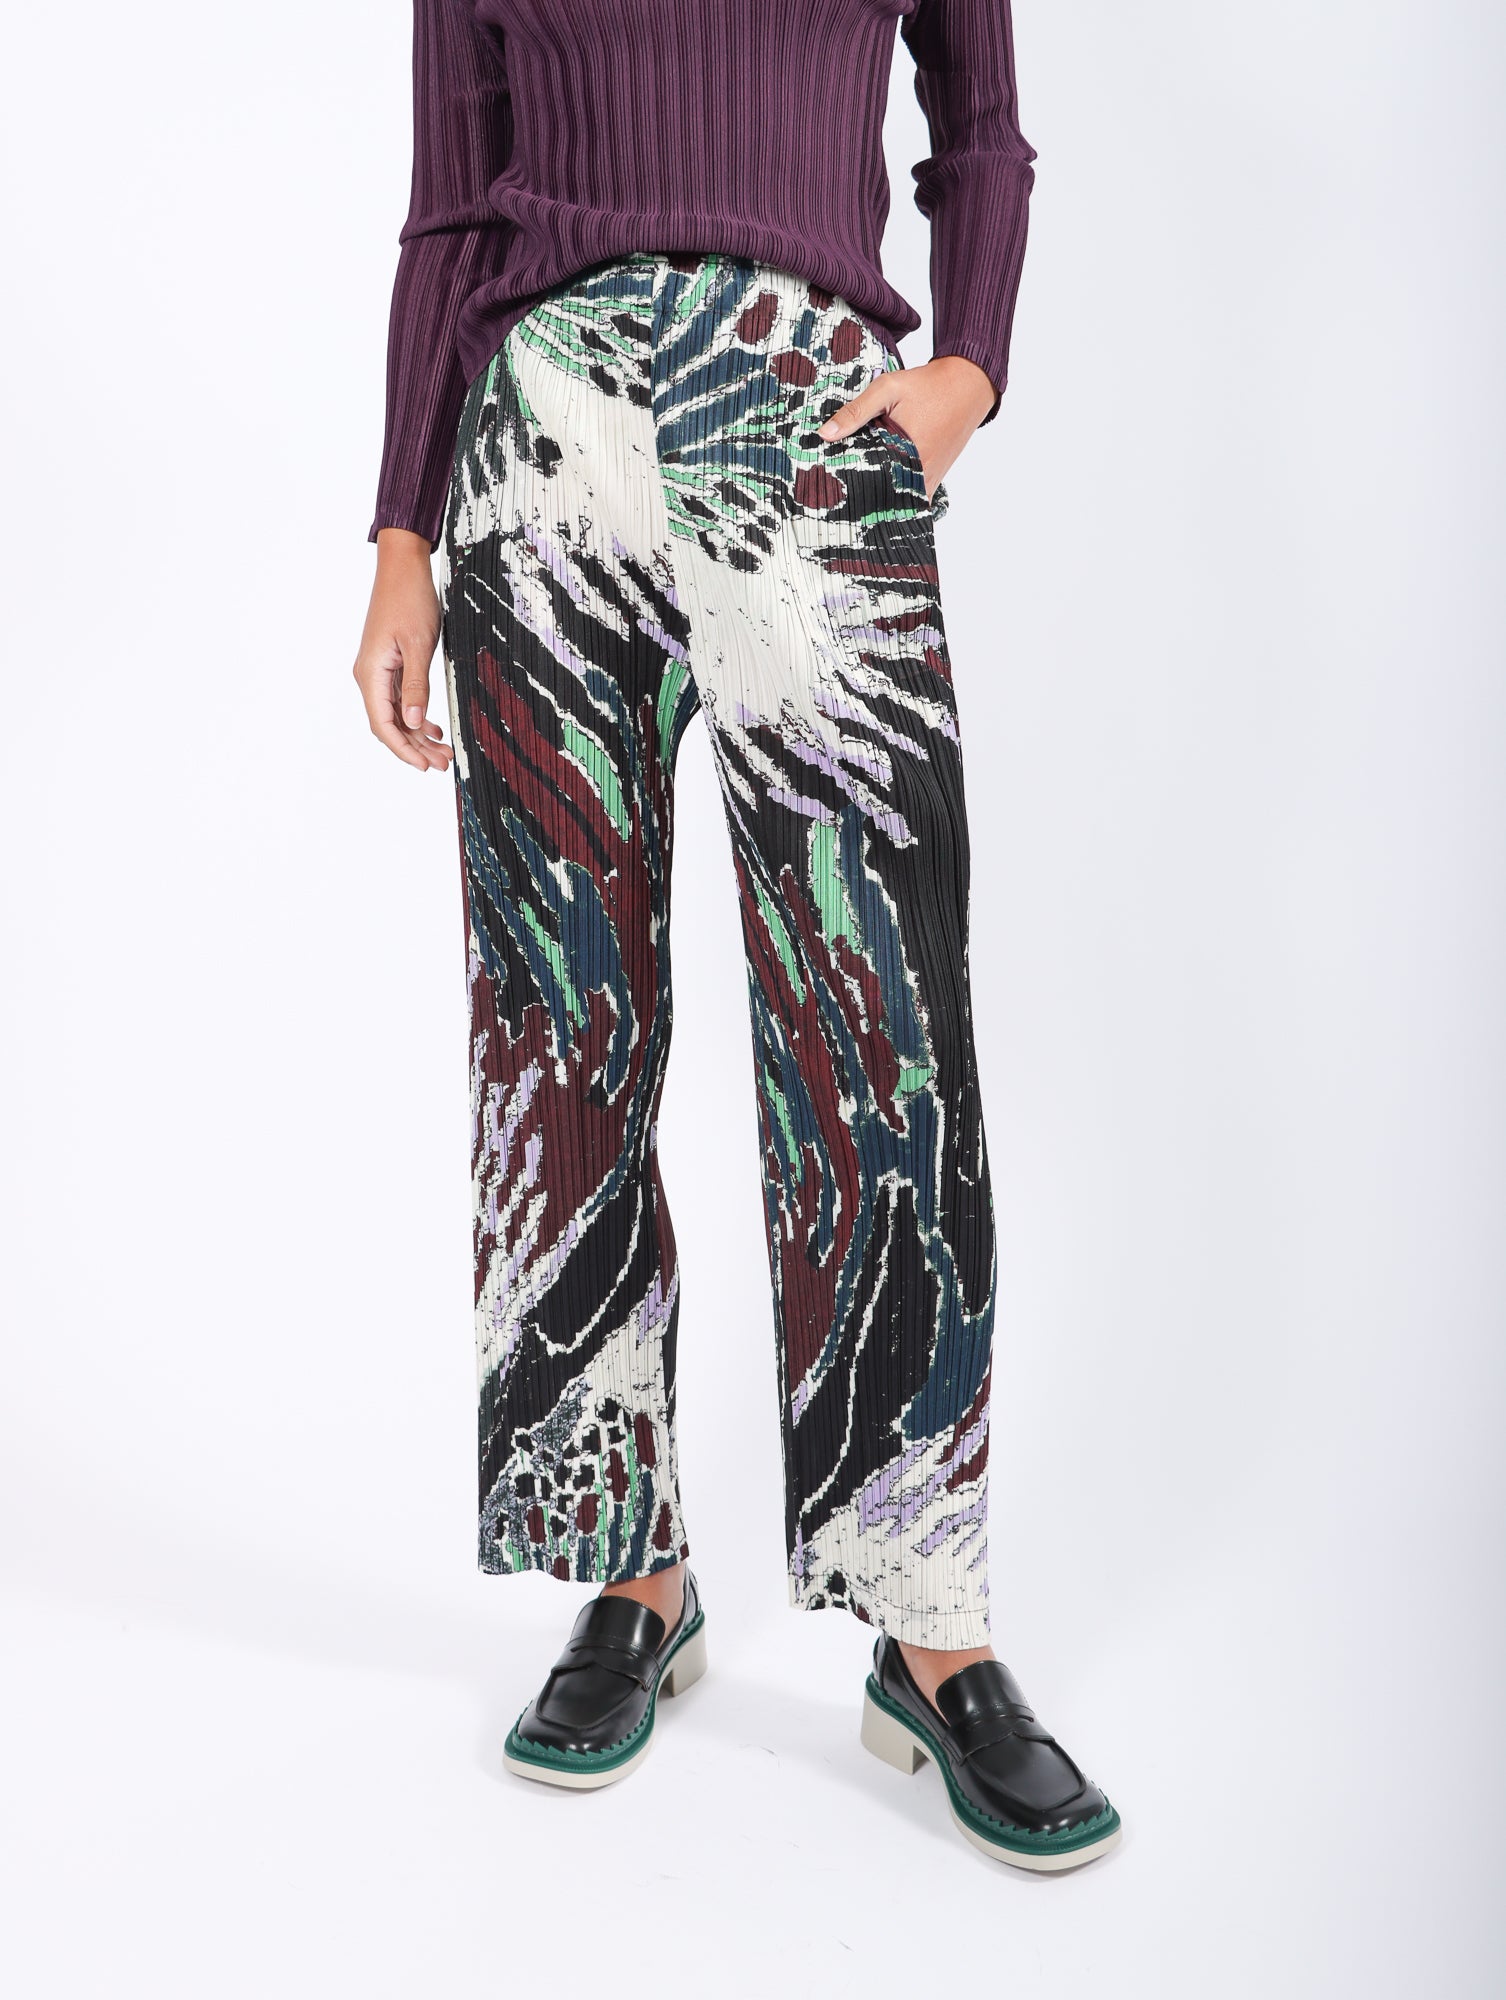 Frosty Forest Pants in Black Print by Pleats Please Issey Miyake